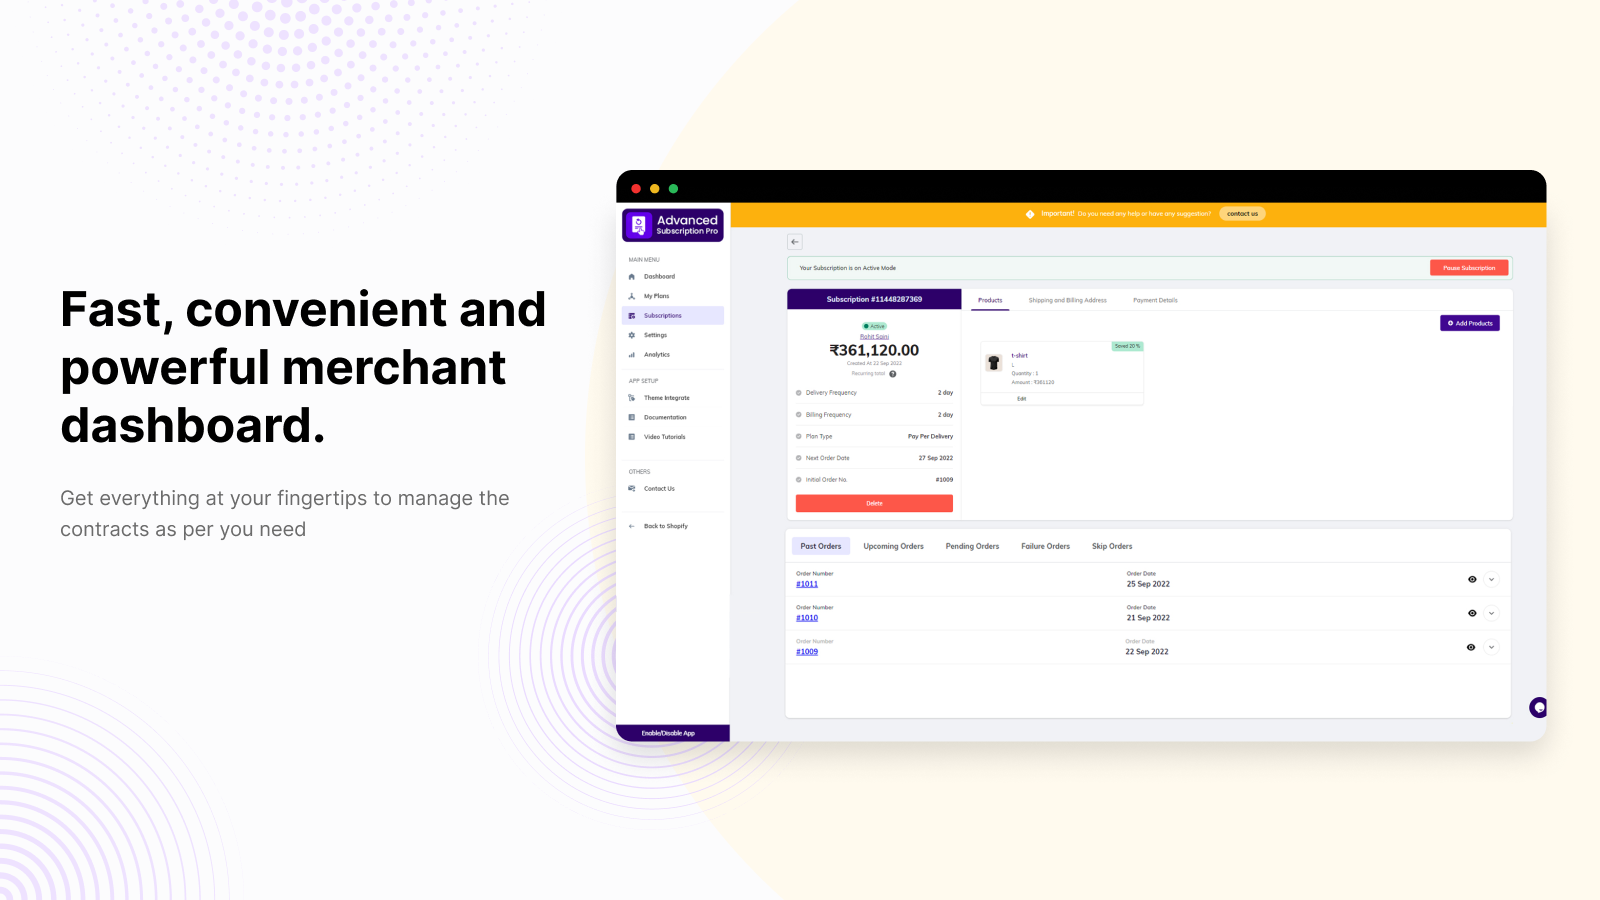 Fast and convenient merchant dashboard